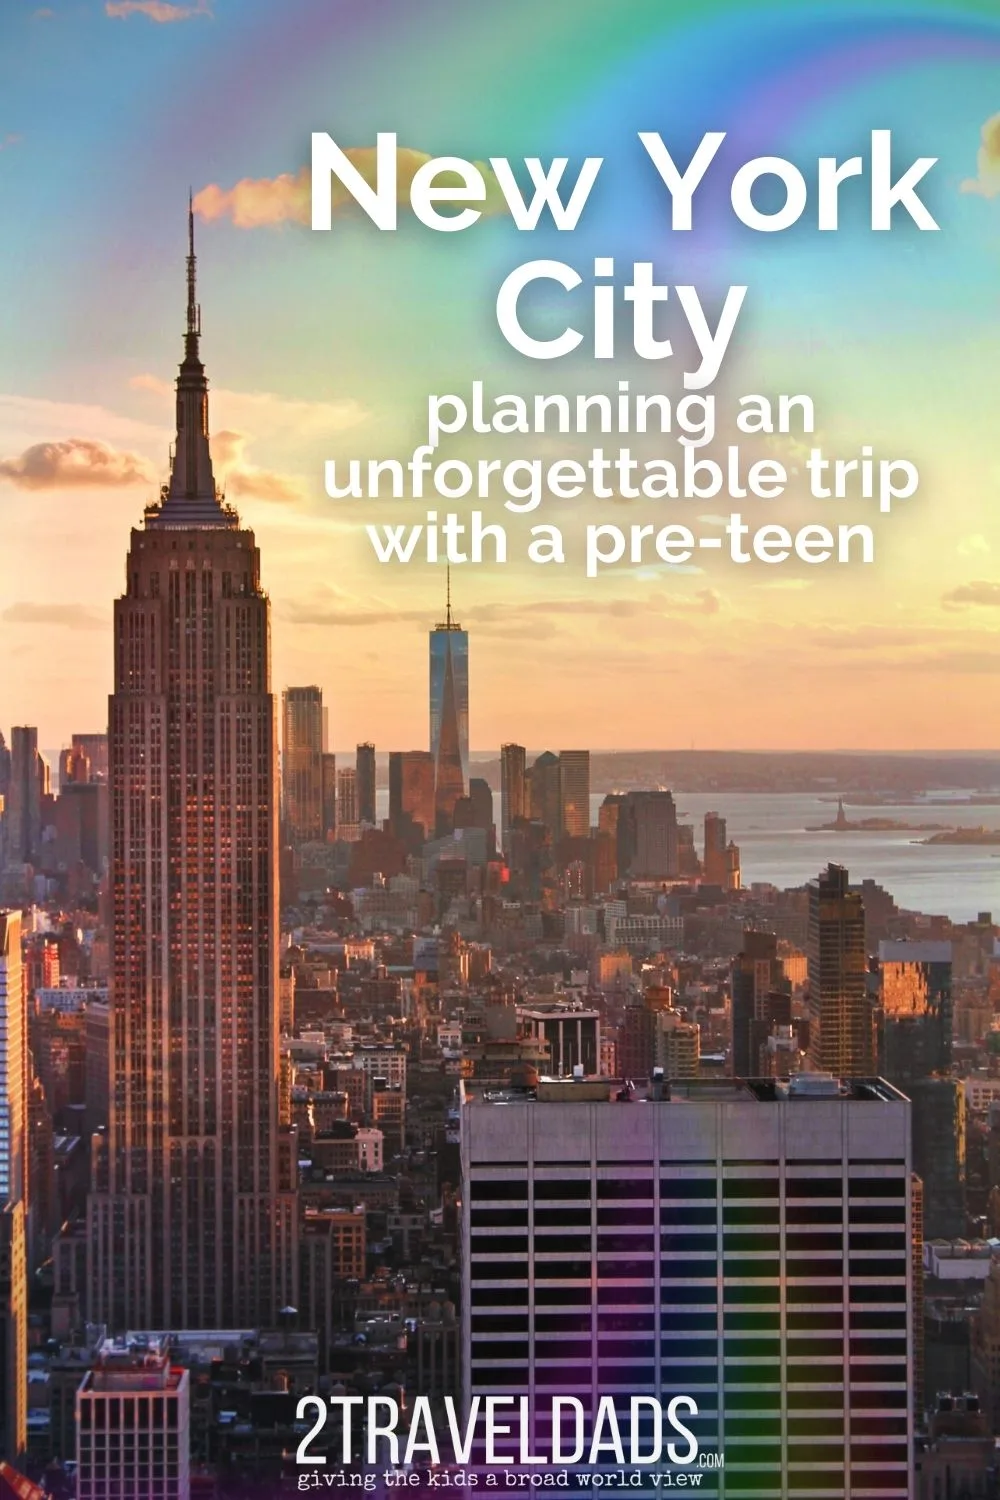 Exploring New York City with a pre-teen is actually really fun and one of the best trips you can take with a growing kiddo. Get a fool proof NYC itinerary, tips for packing, and listen to a podcast episode featuring our 12 year old adventurer.